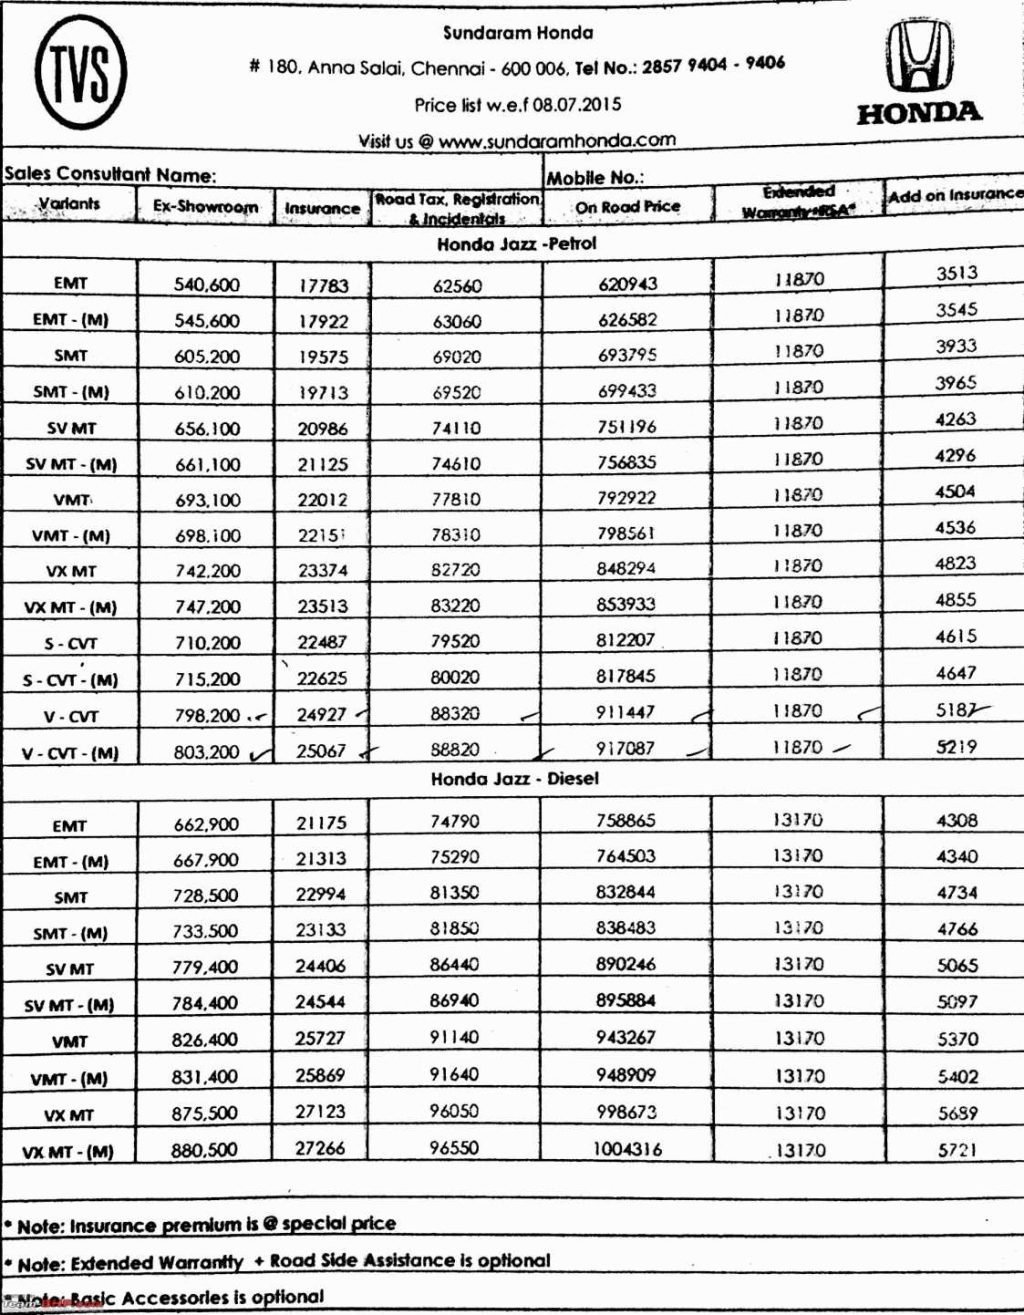 Car Cost Comparison Spreadsheet Intended For Vehicle Comparison Spreadsheet Car Cost  Askoverflow